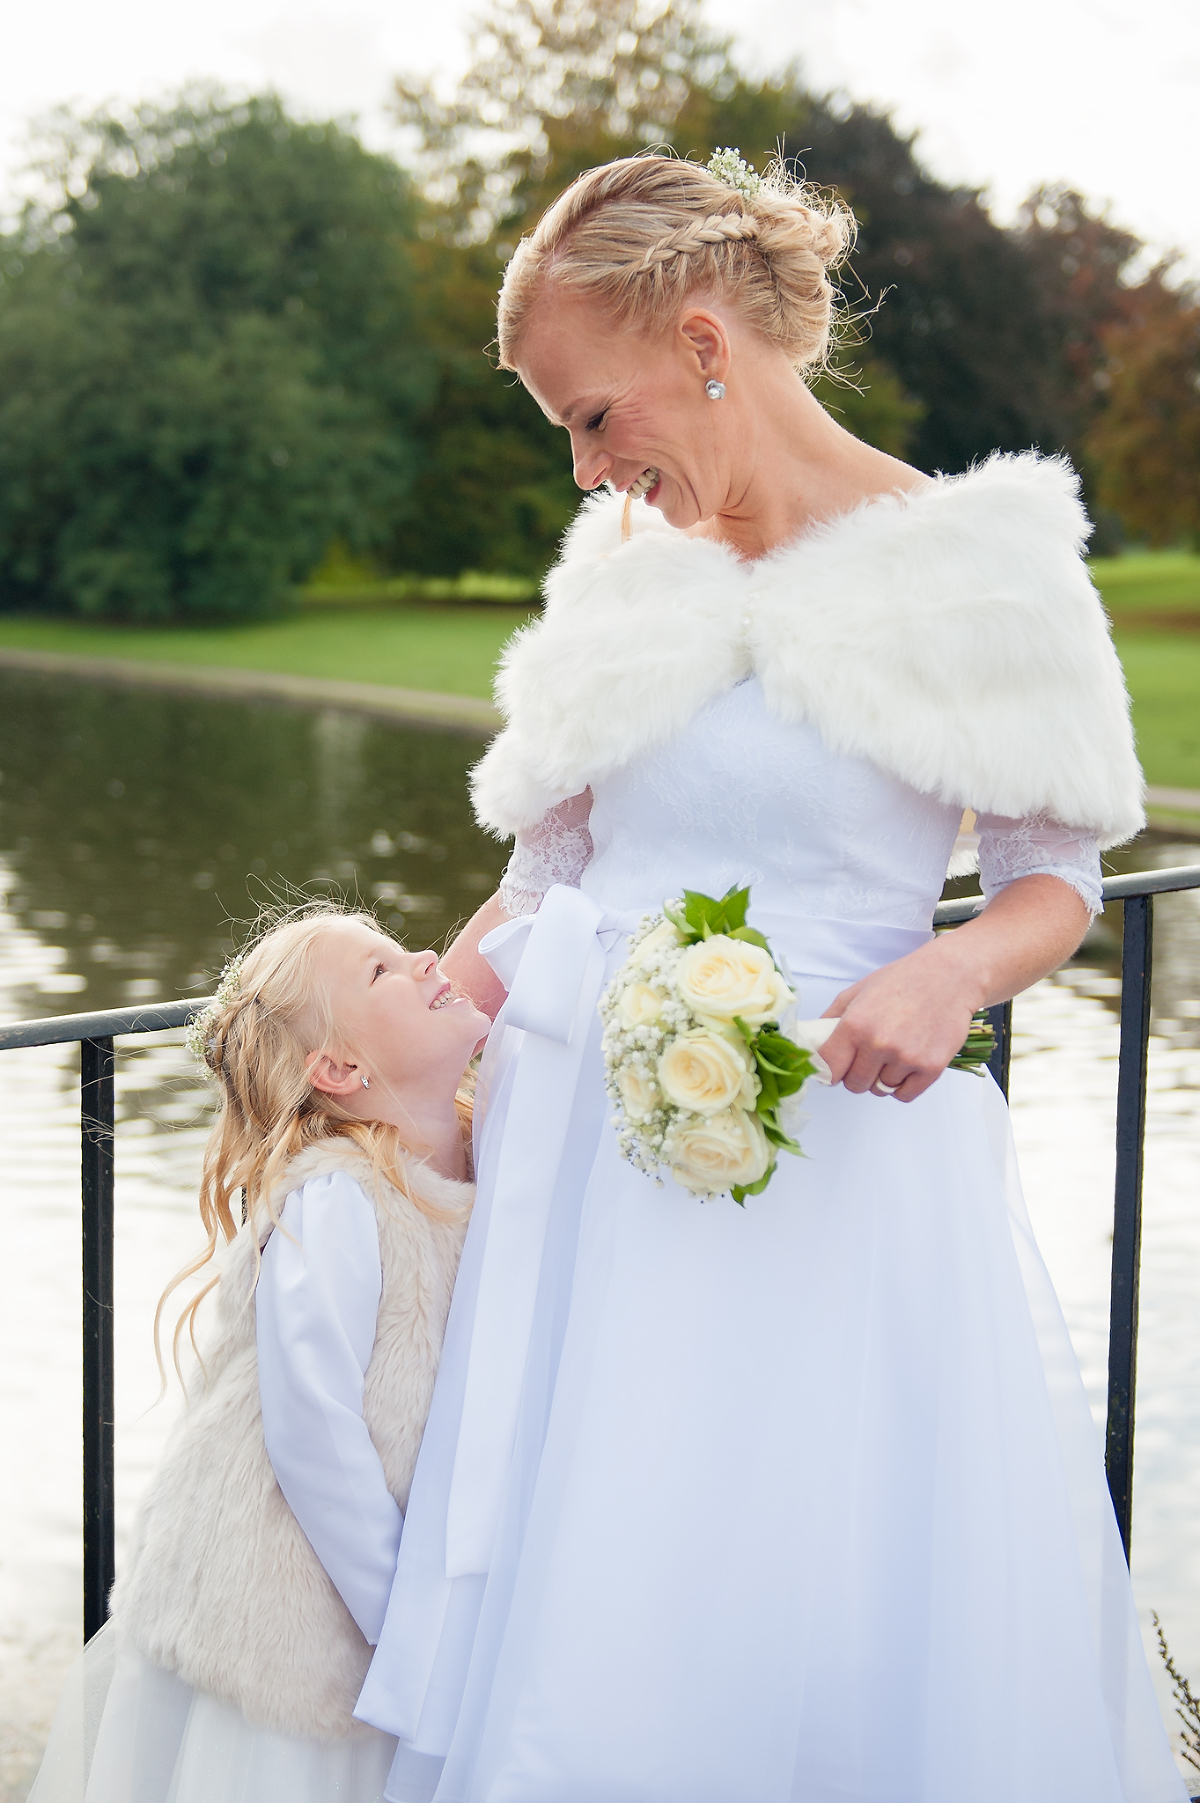 Wedding photography in St Albans